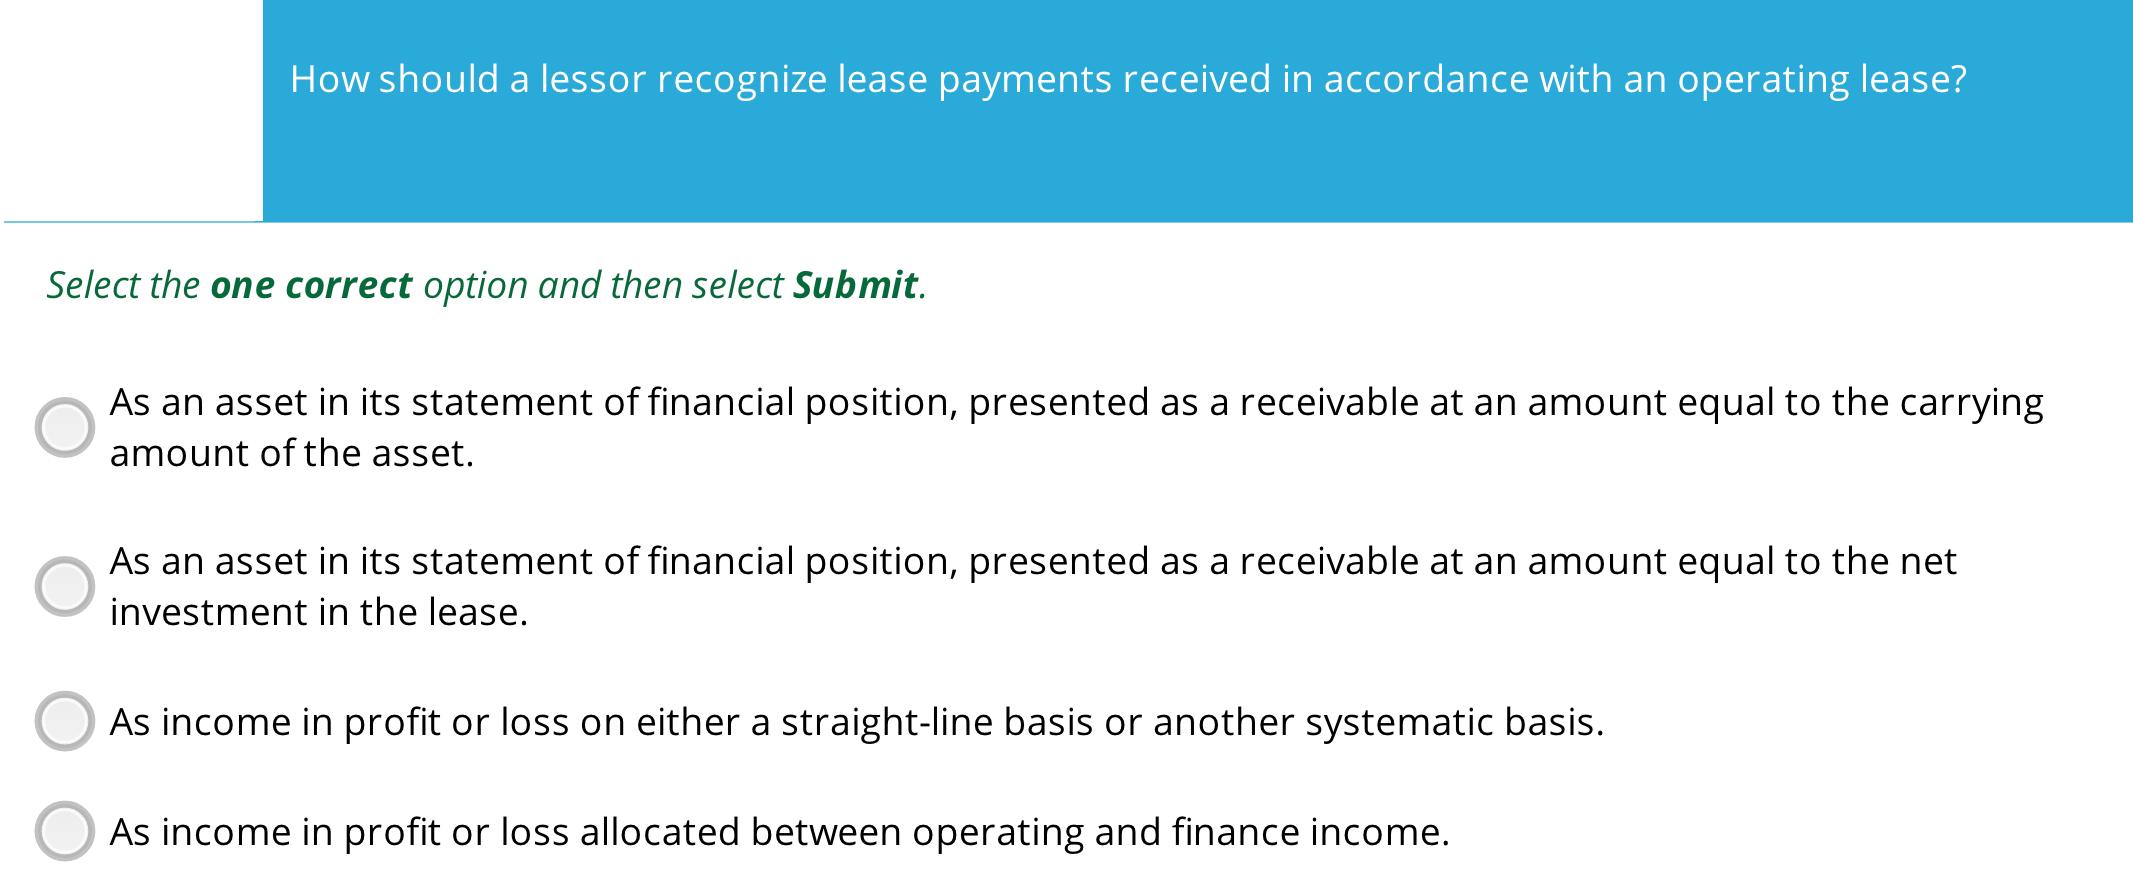 How should a lessor recognize lease payments received in accordance with an operating lease? Select the one